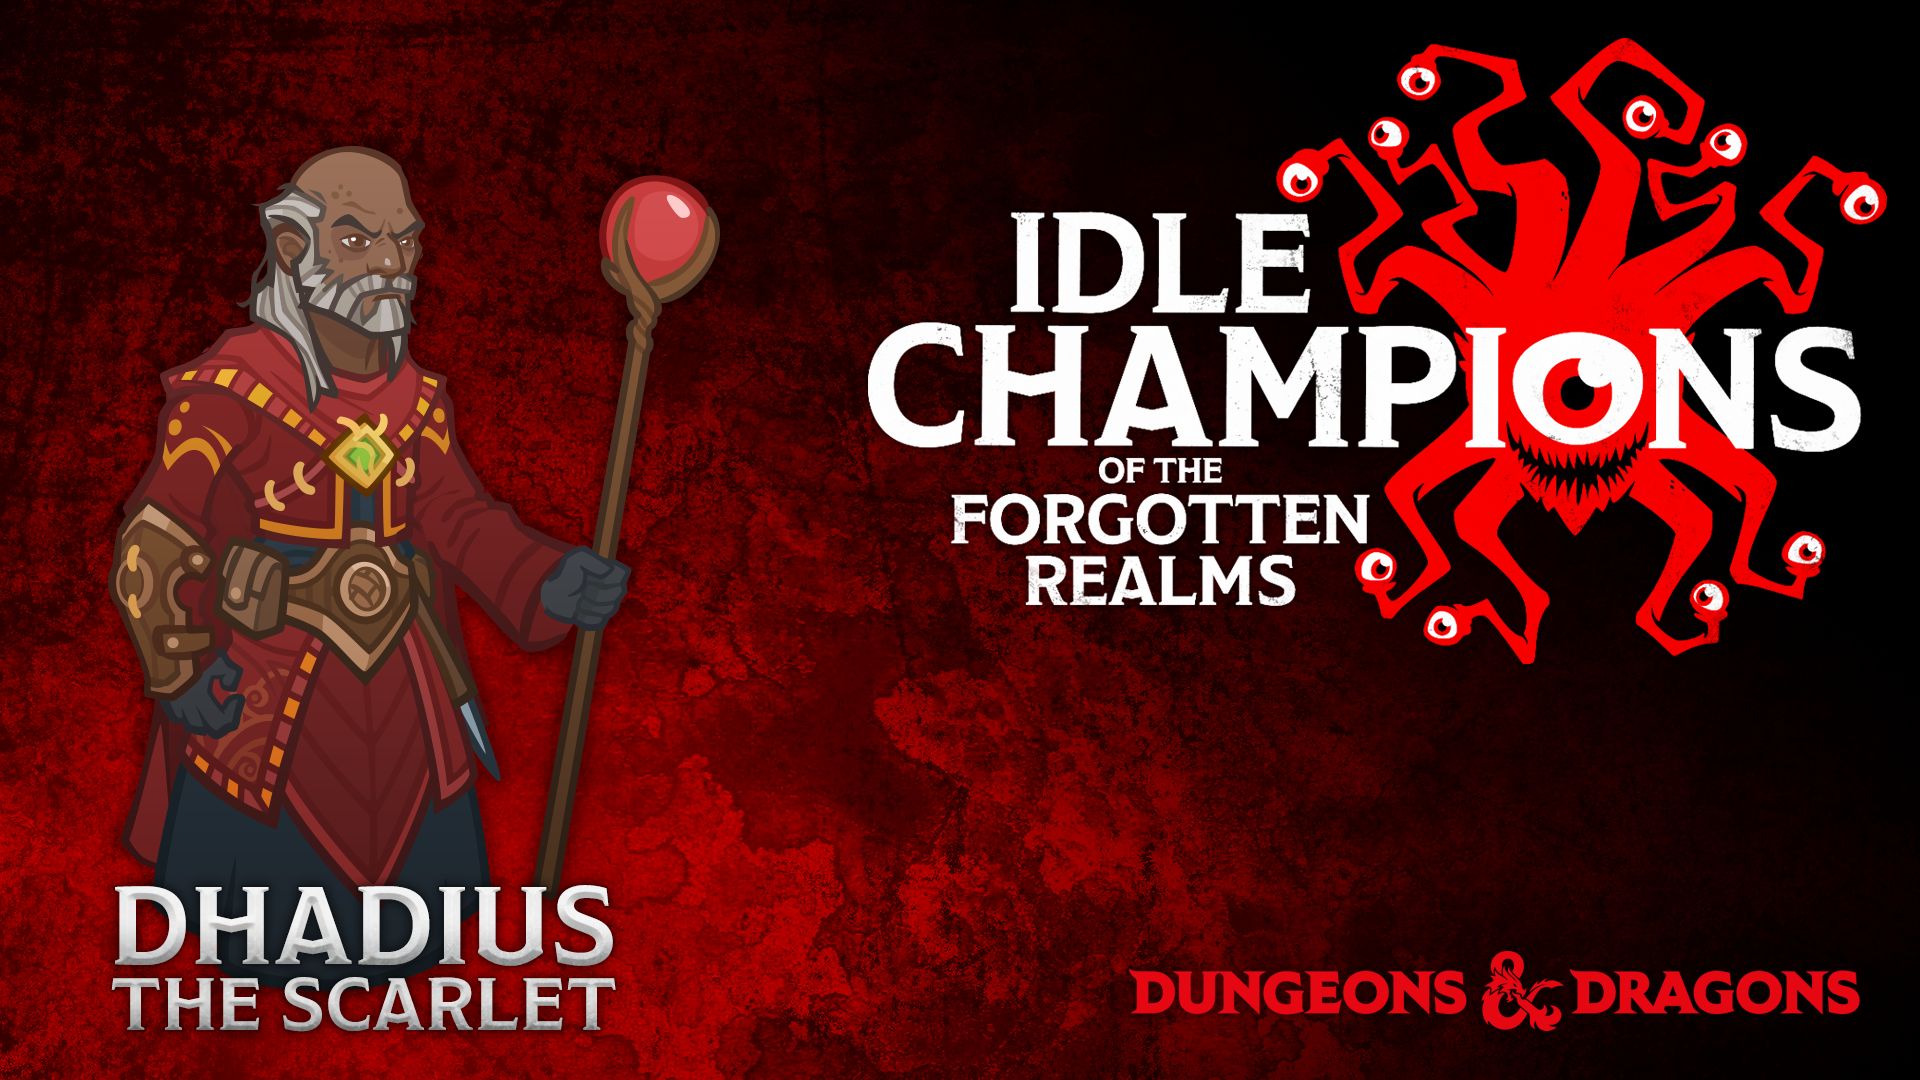 video game, idle champions of the forgotten realms